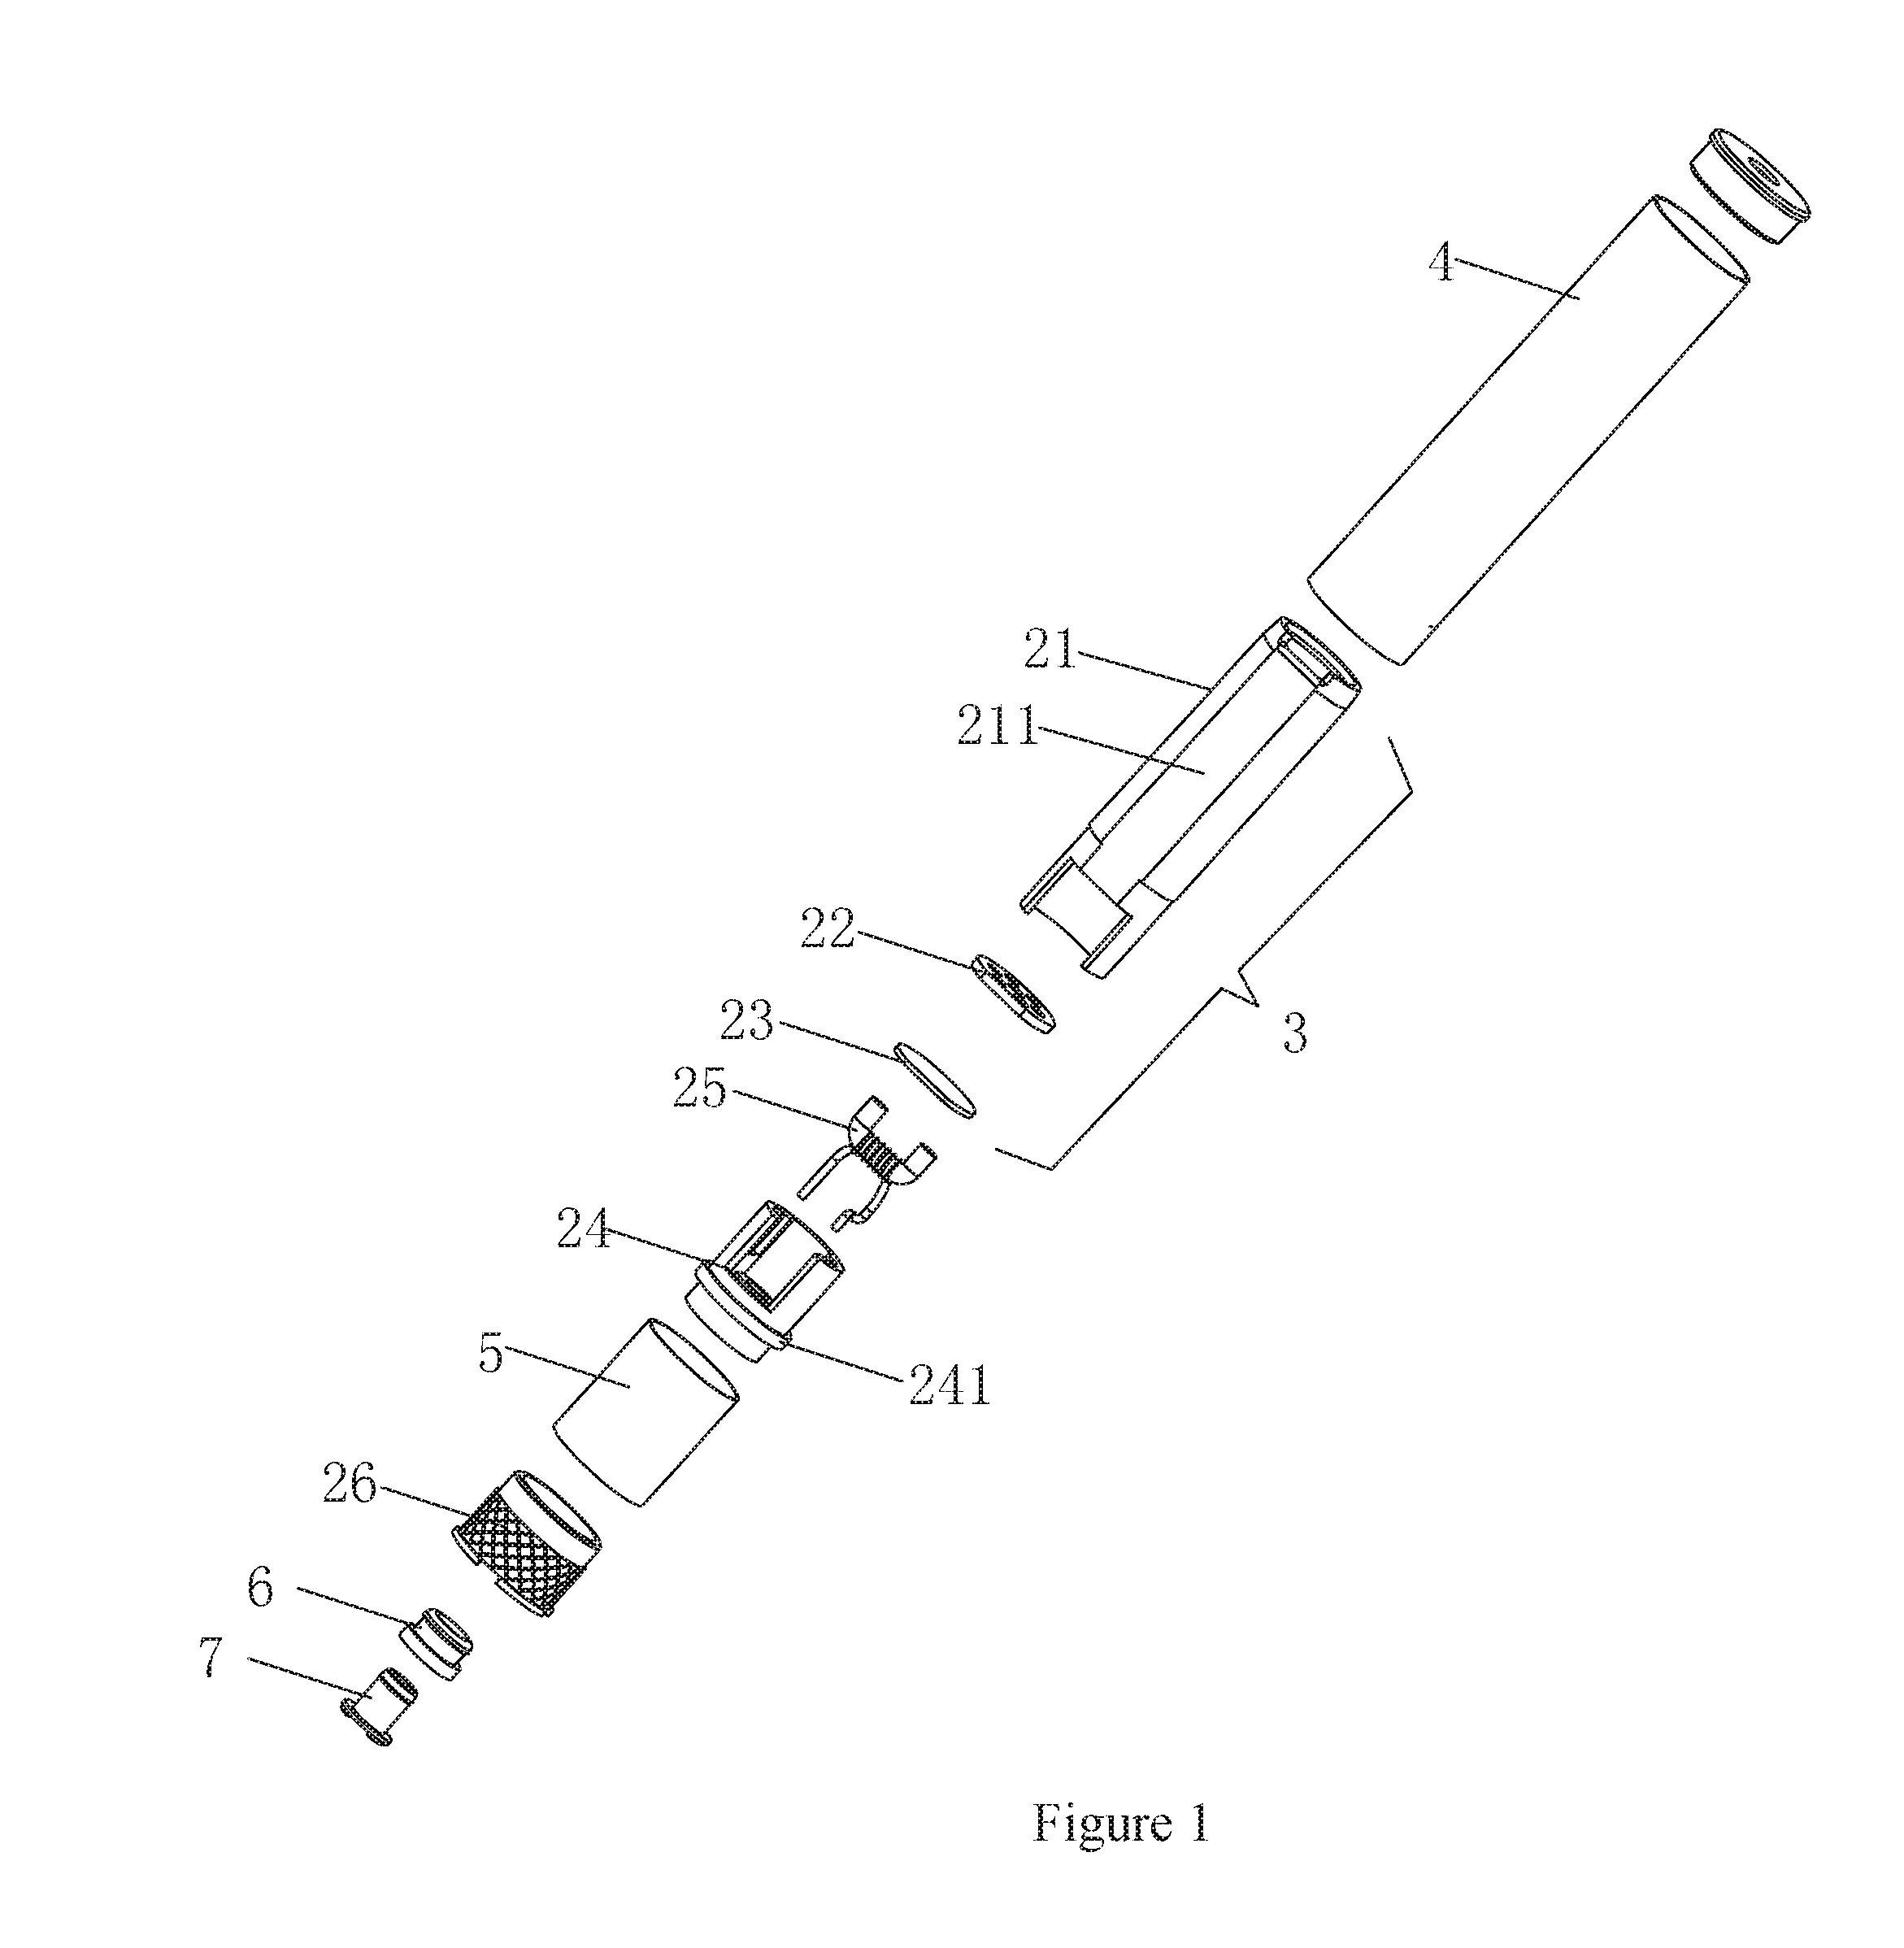 Cotton-free electronic cigarette, heat-insulating and heat-dissipating component of vaporizer device, and method for heat insulation and heat dissipation